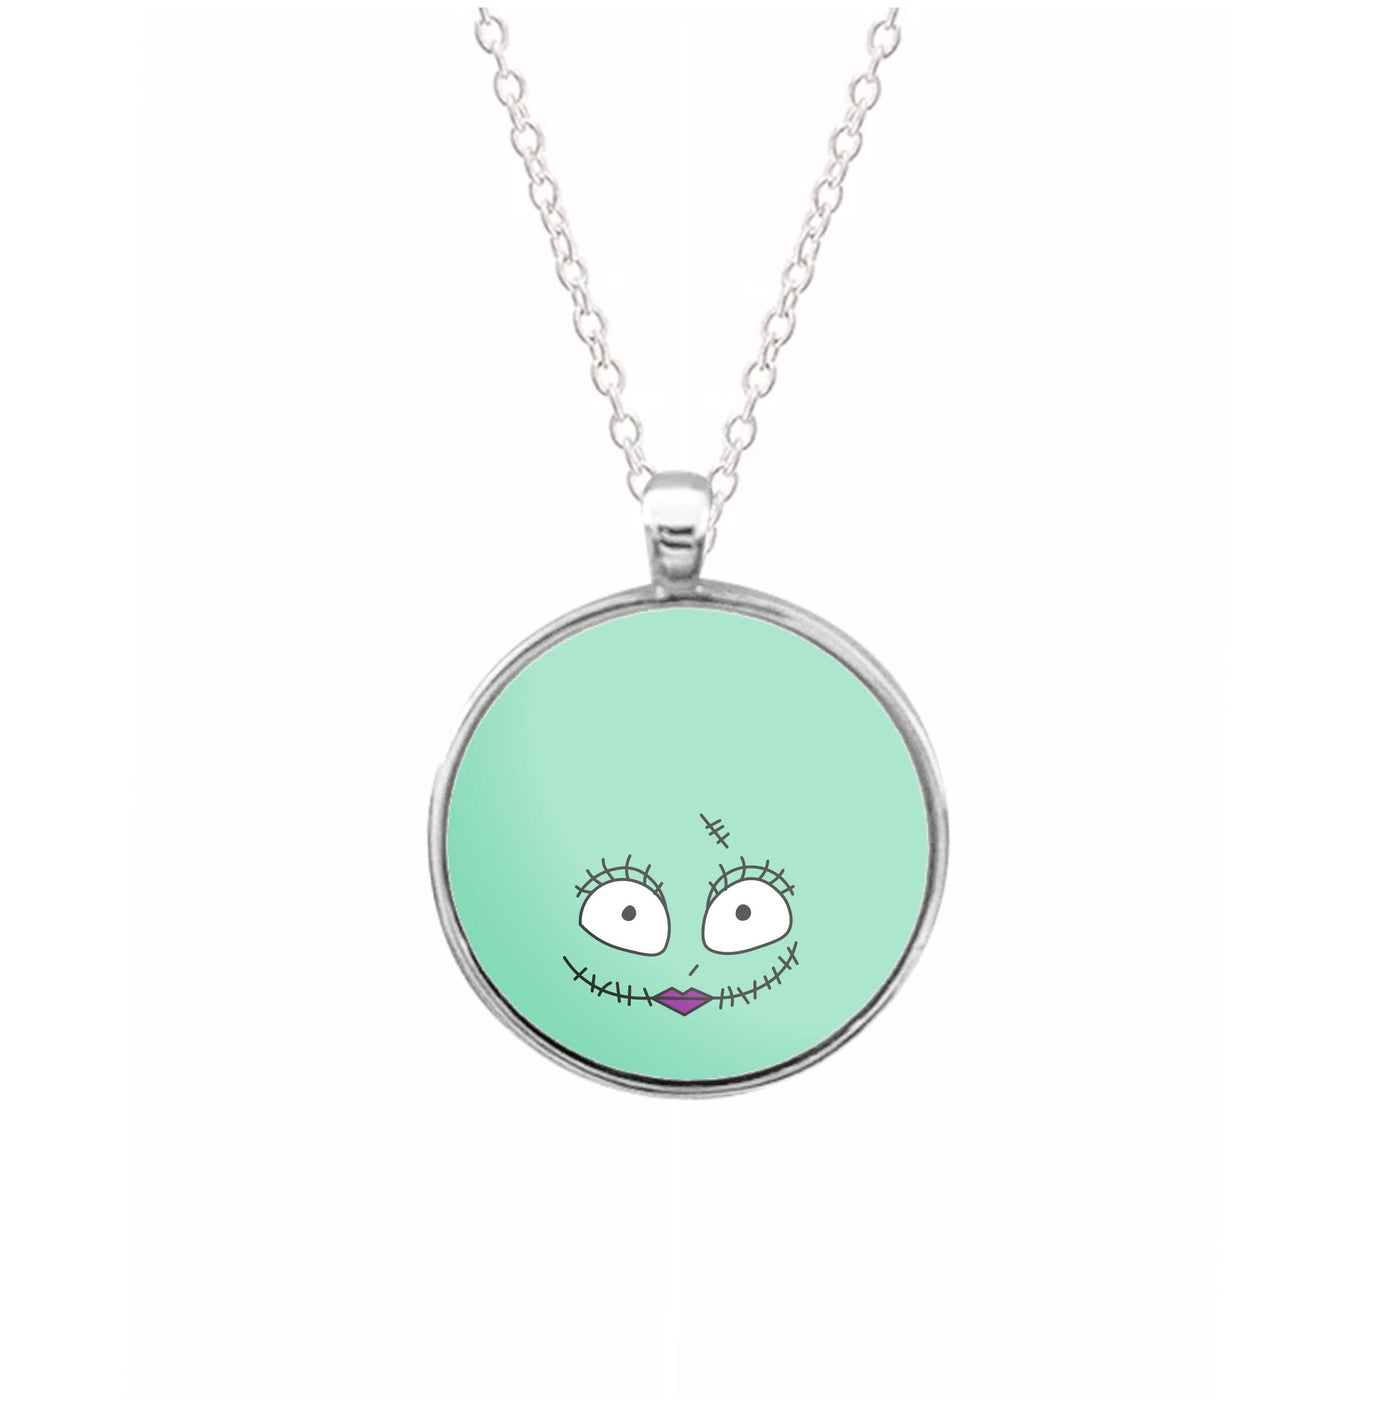 Sally Face - Nightmare Before Christmas Necklace